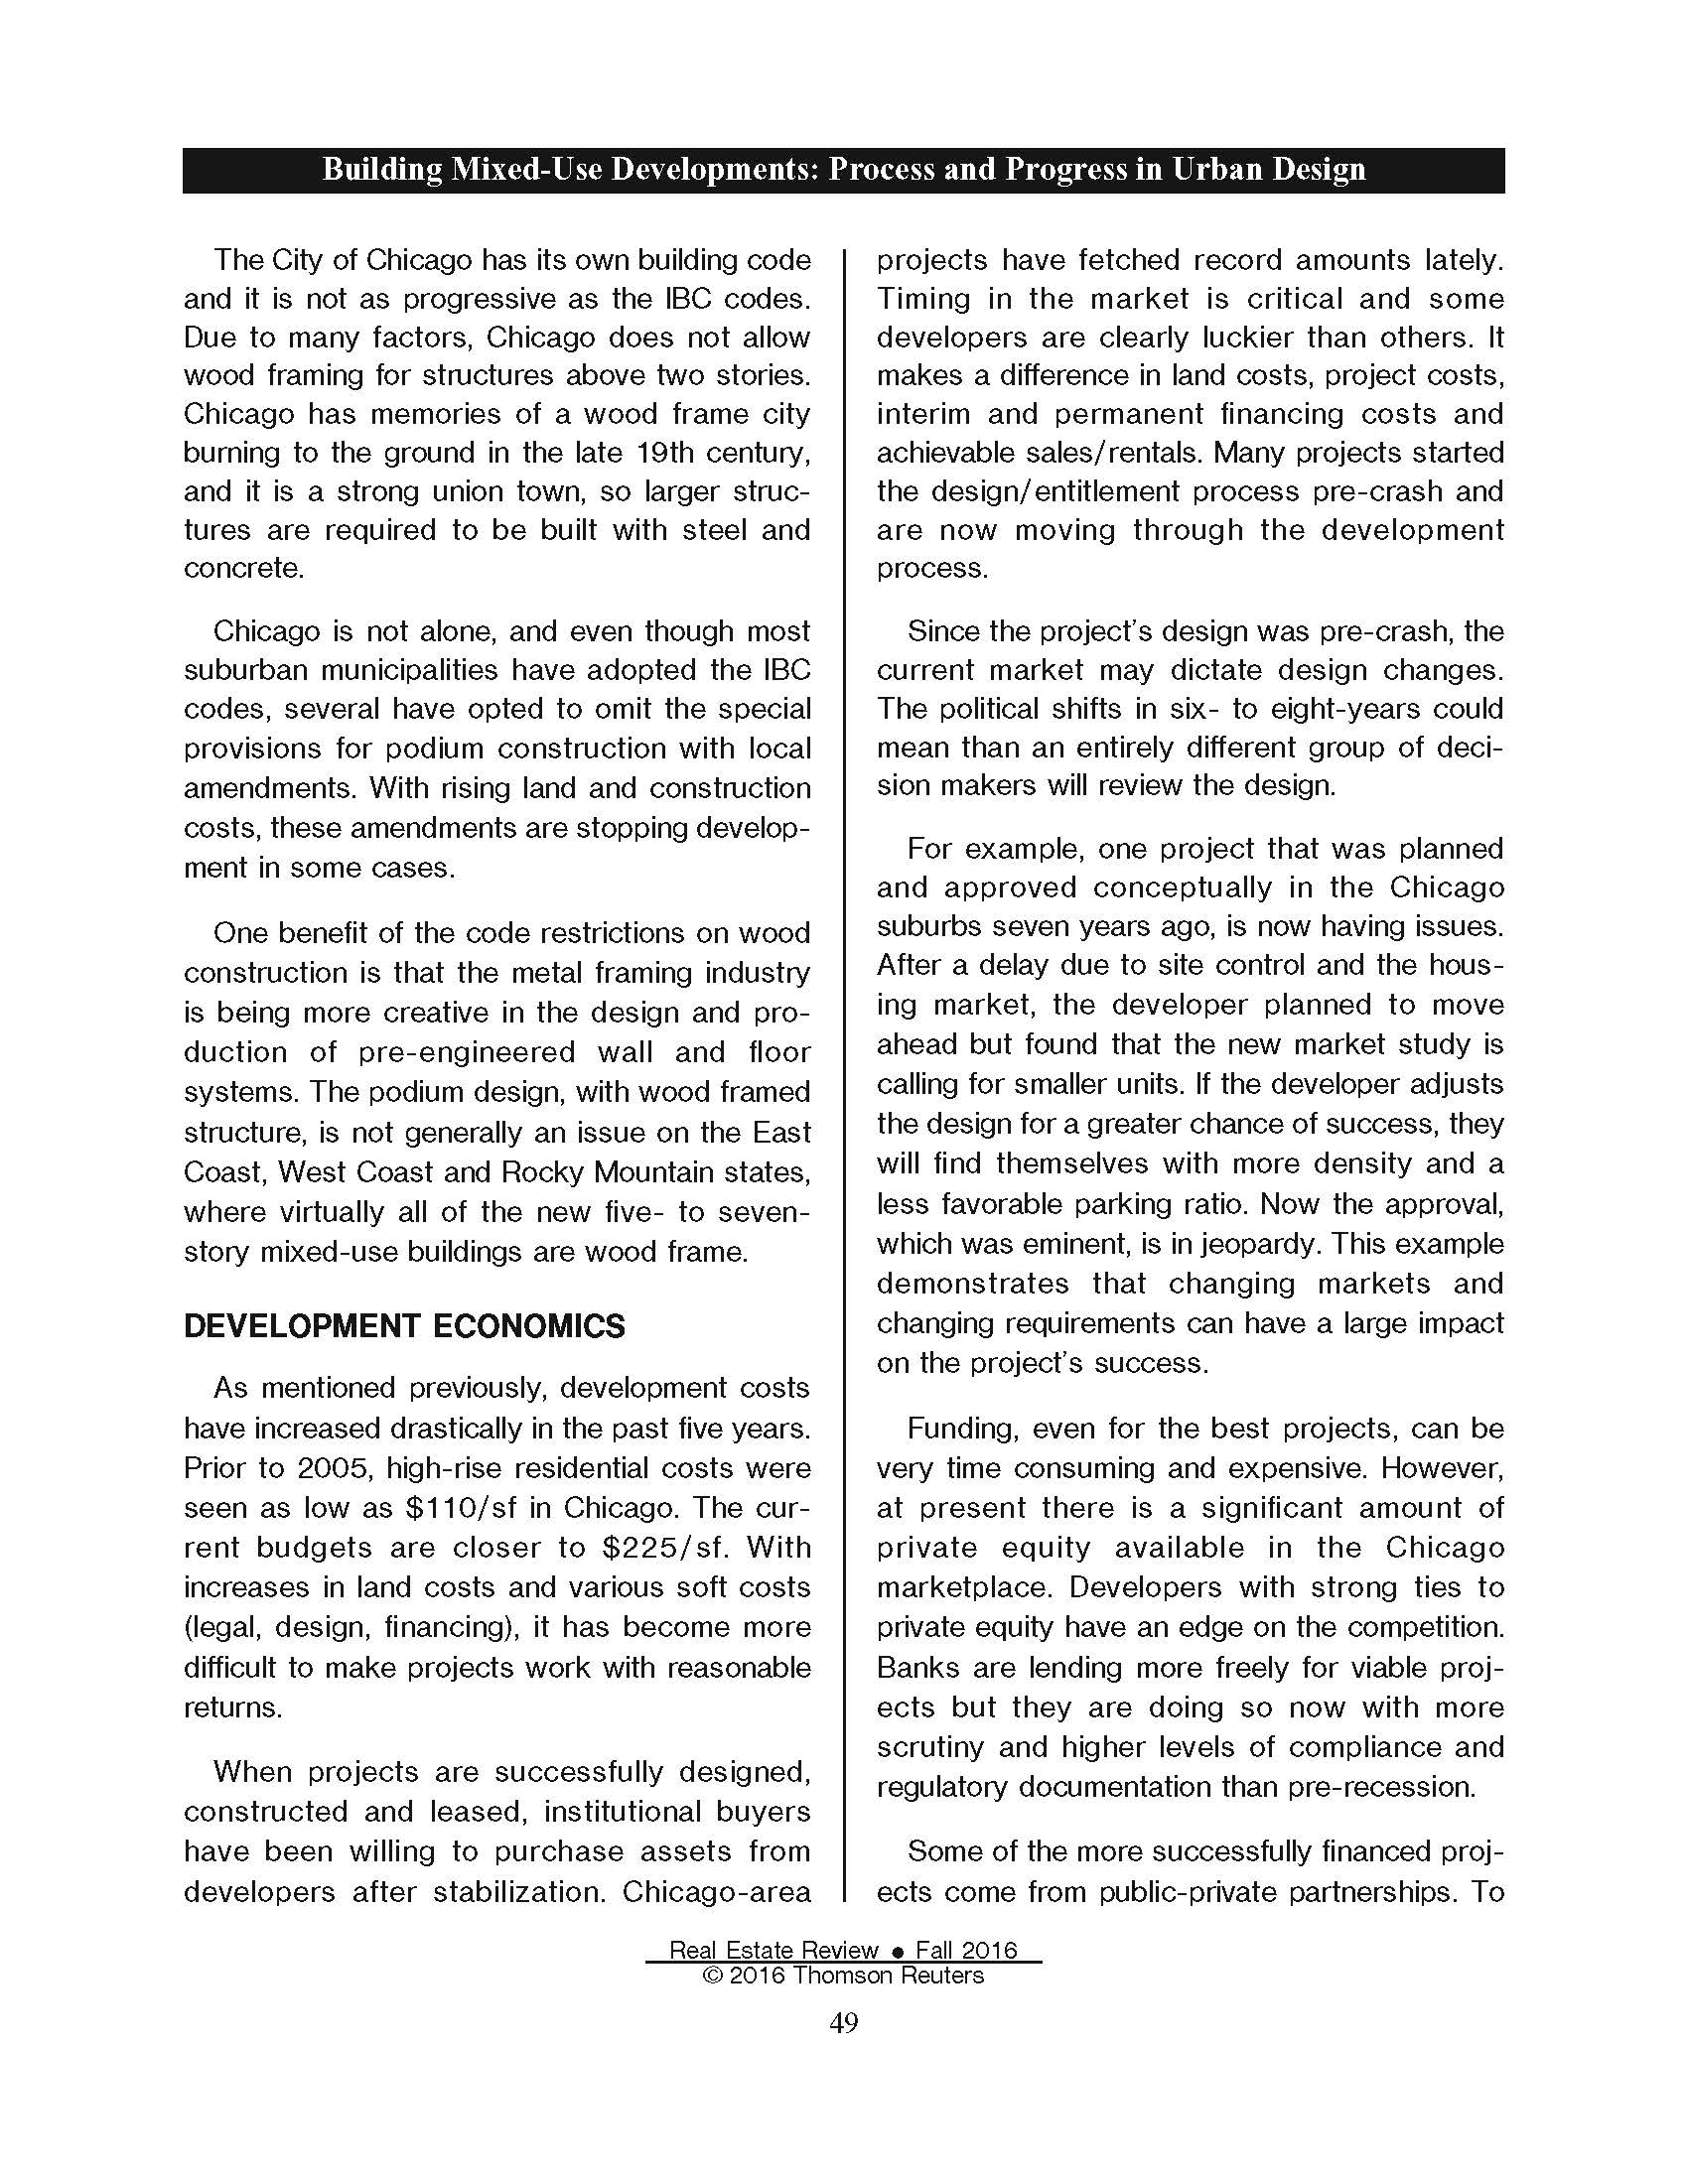 Real Estate Review (Building Mixed-Use Developments Process and Progress in Urban Design) 0916_Page_15